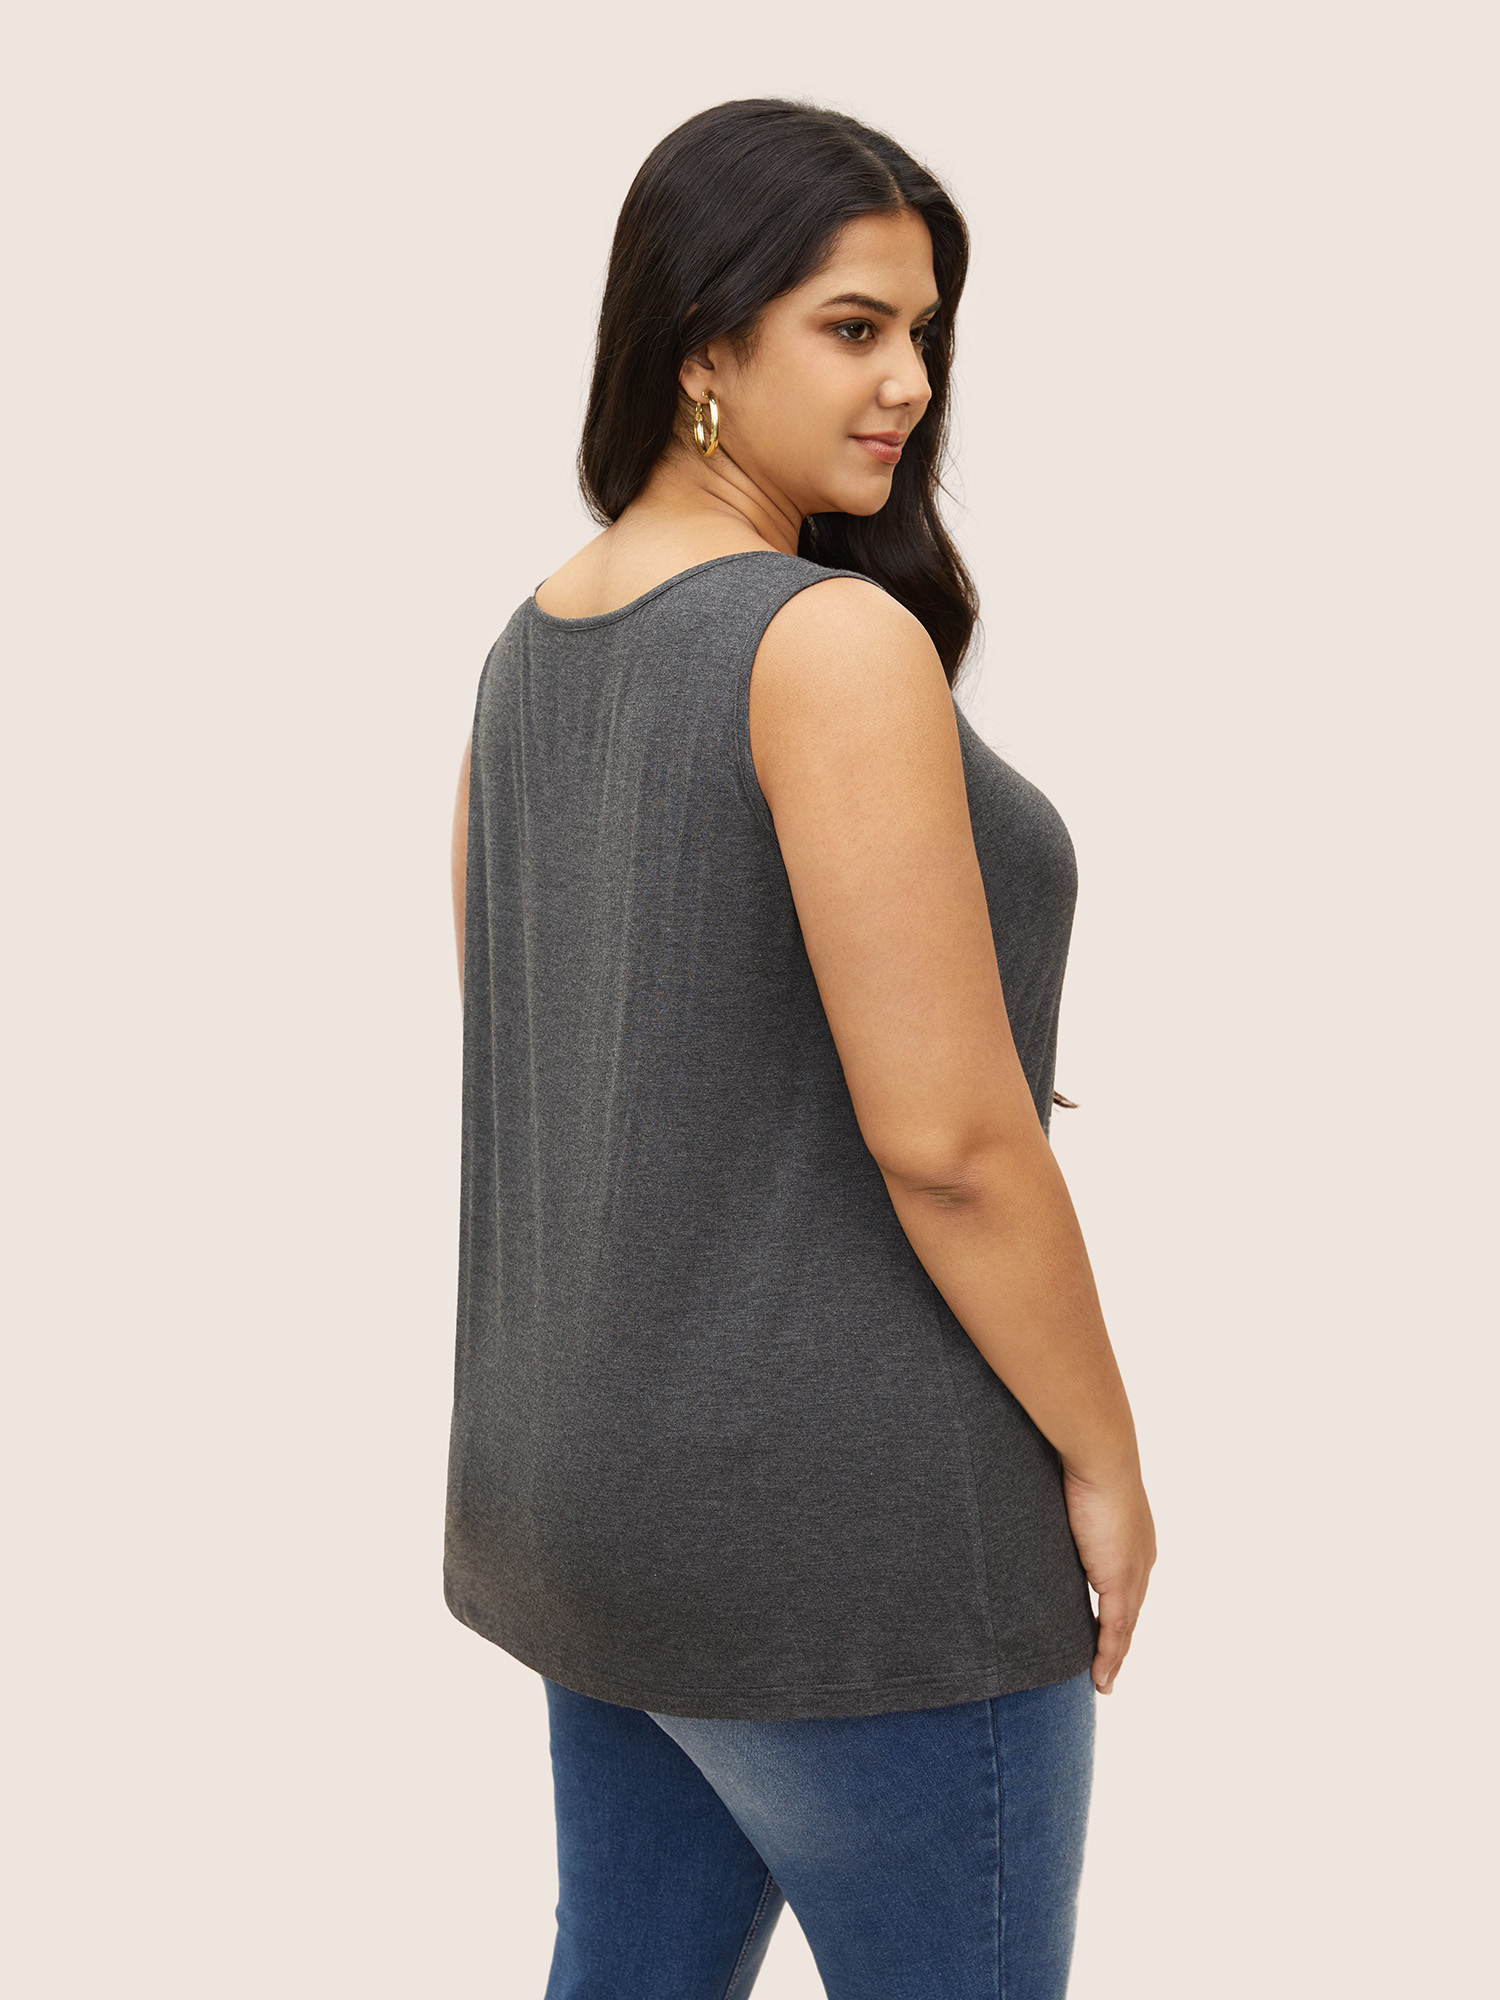 

Plus Size Supersoft Essentials Plain Square Neck Skinny Tank Top Women DimGray Basics Non Square Neck Everyday Tank Tops Camis BloomChic